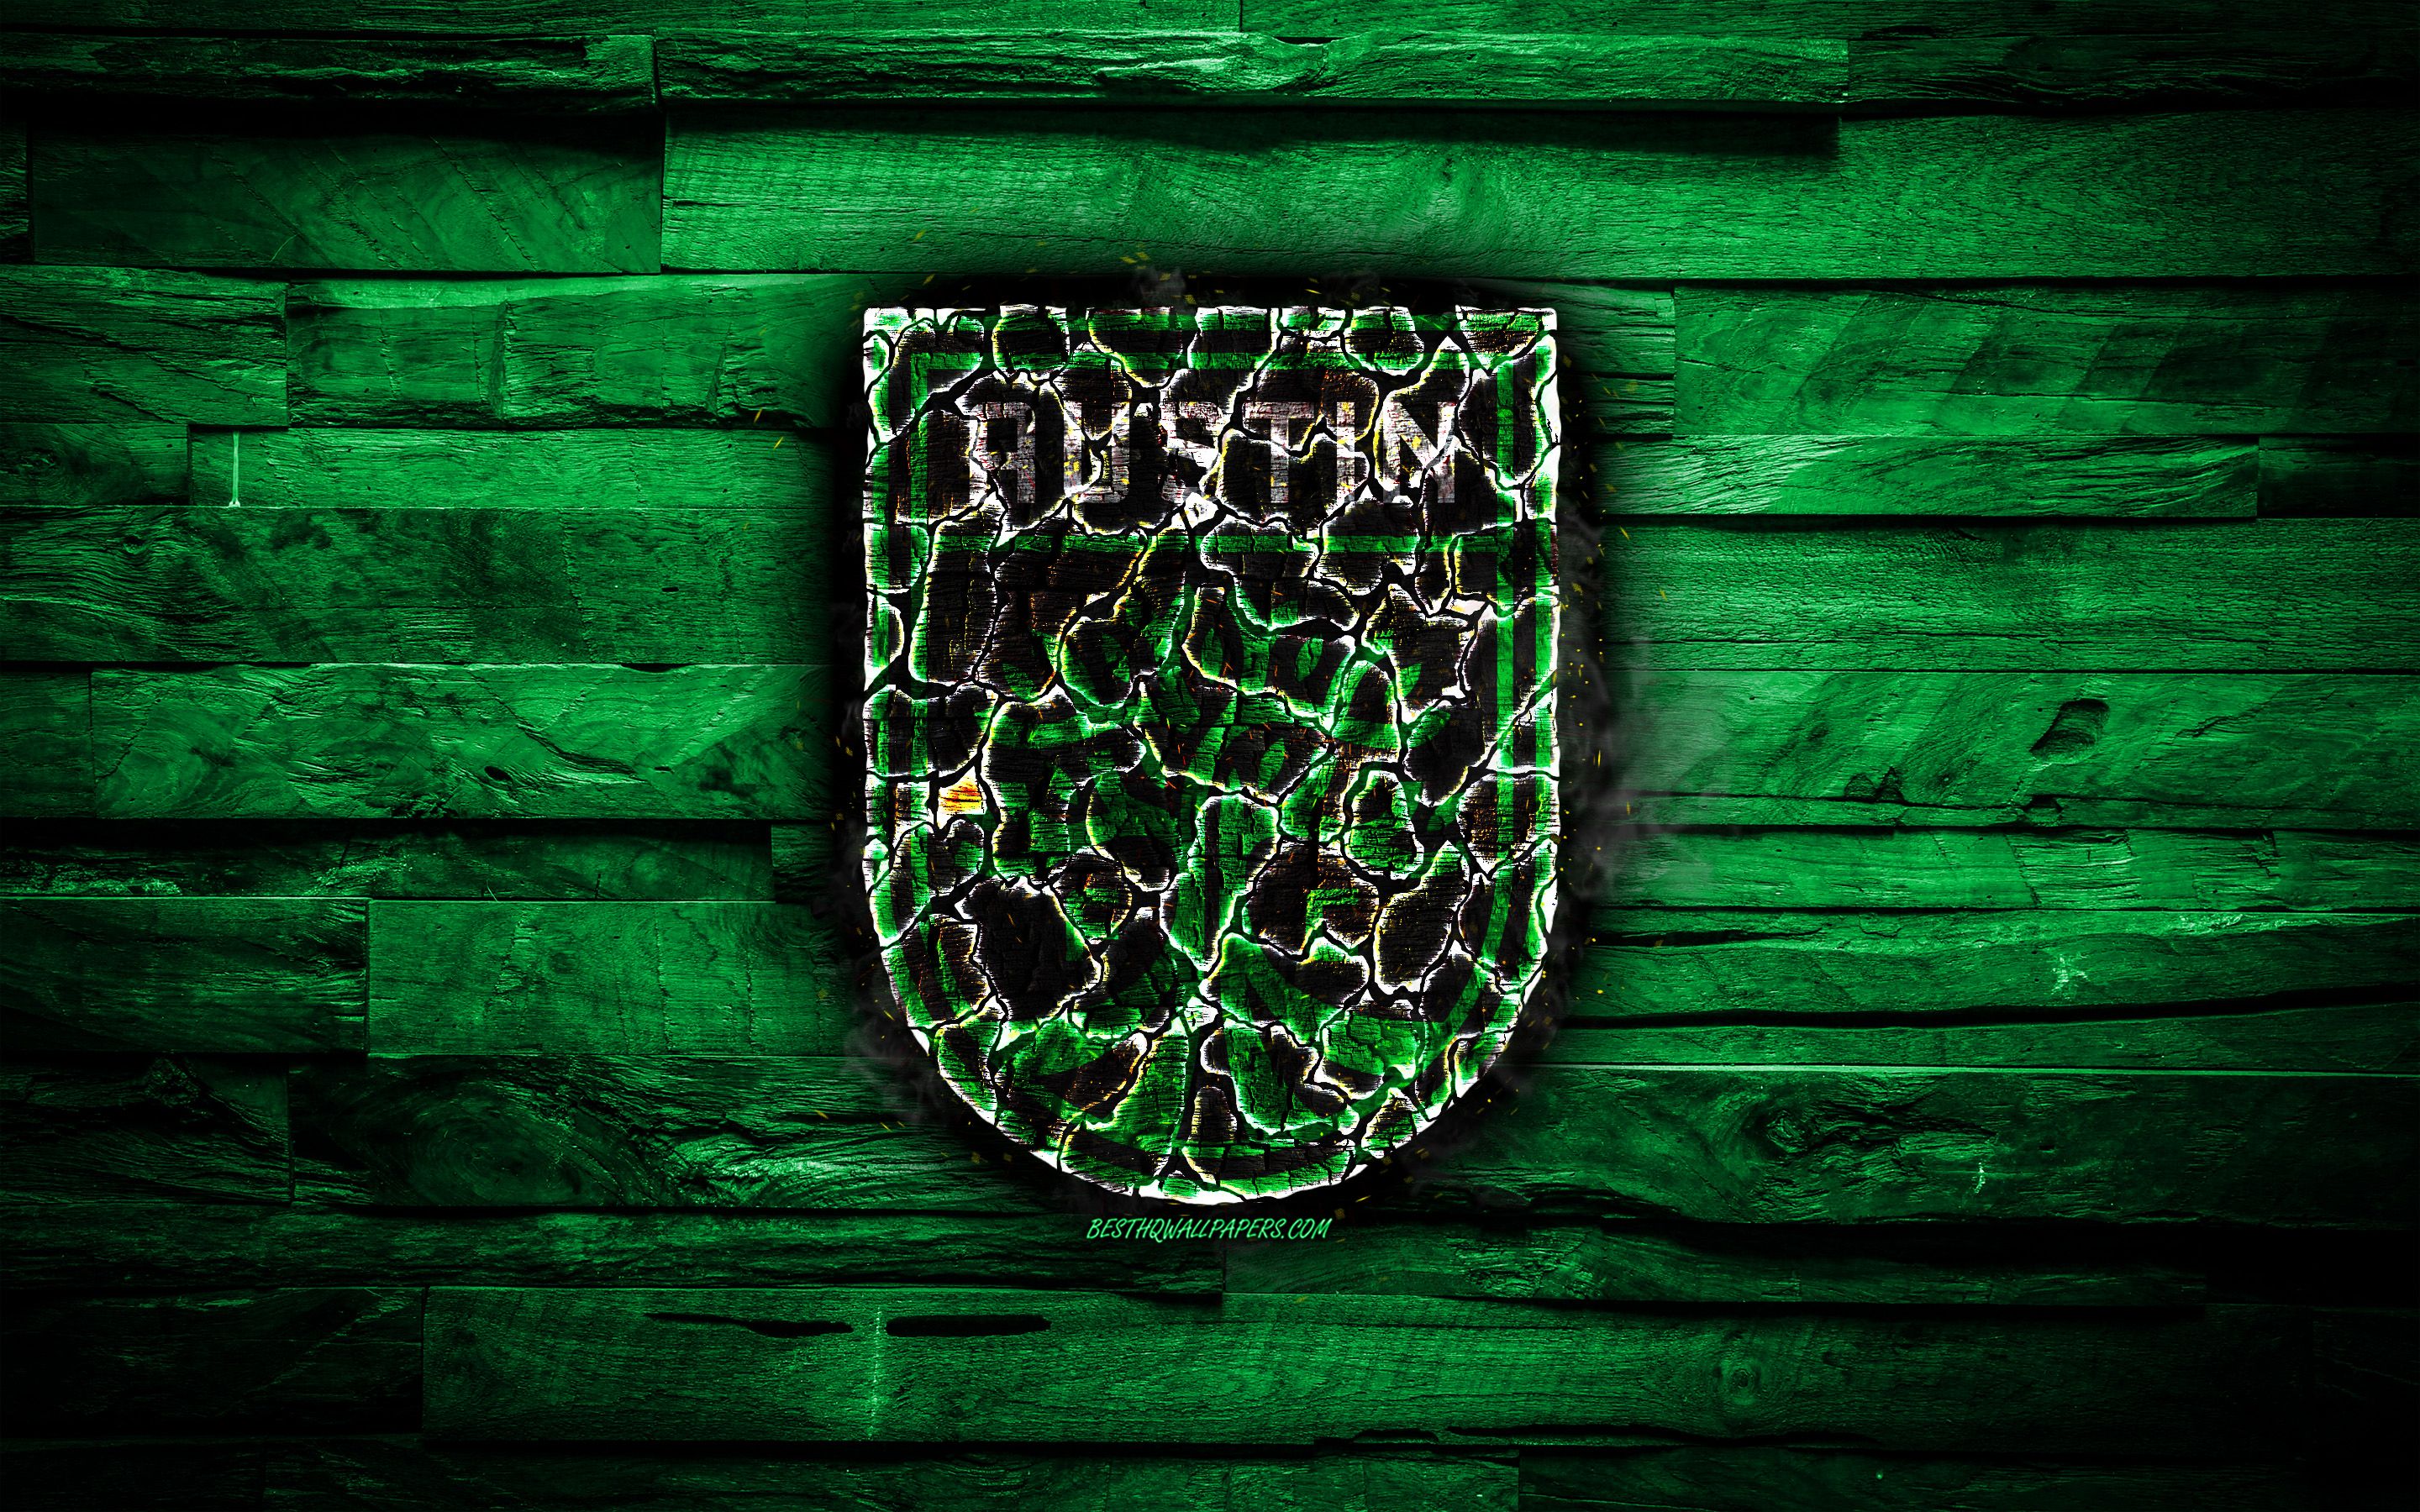 Download wallpaper Austin FC, burning logo, MLS, green wooden background, american football club, FC Austin, grunge, football, soccer, Austin logo, Austin, USA for desktop with resolution 2880x1800. High Quality HD picture wallpaper